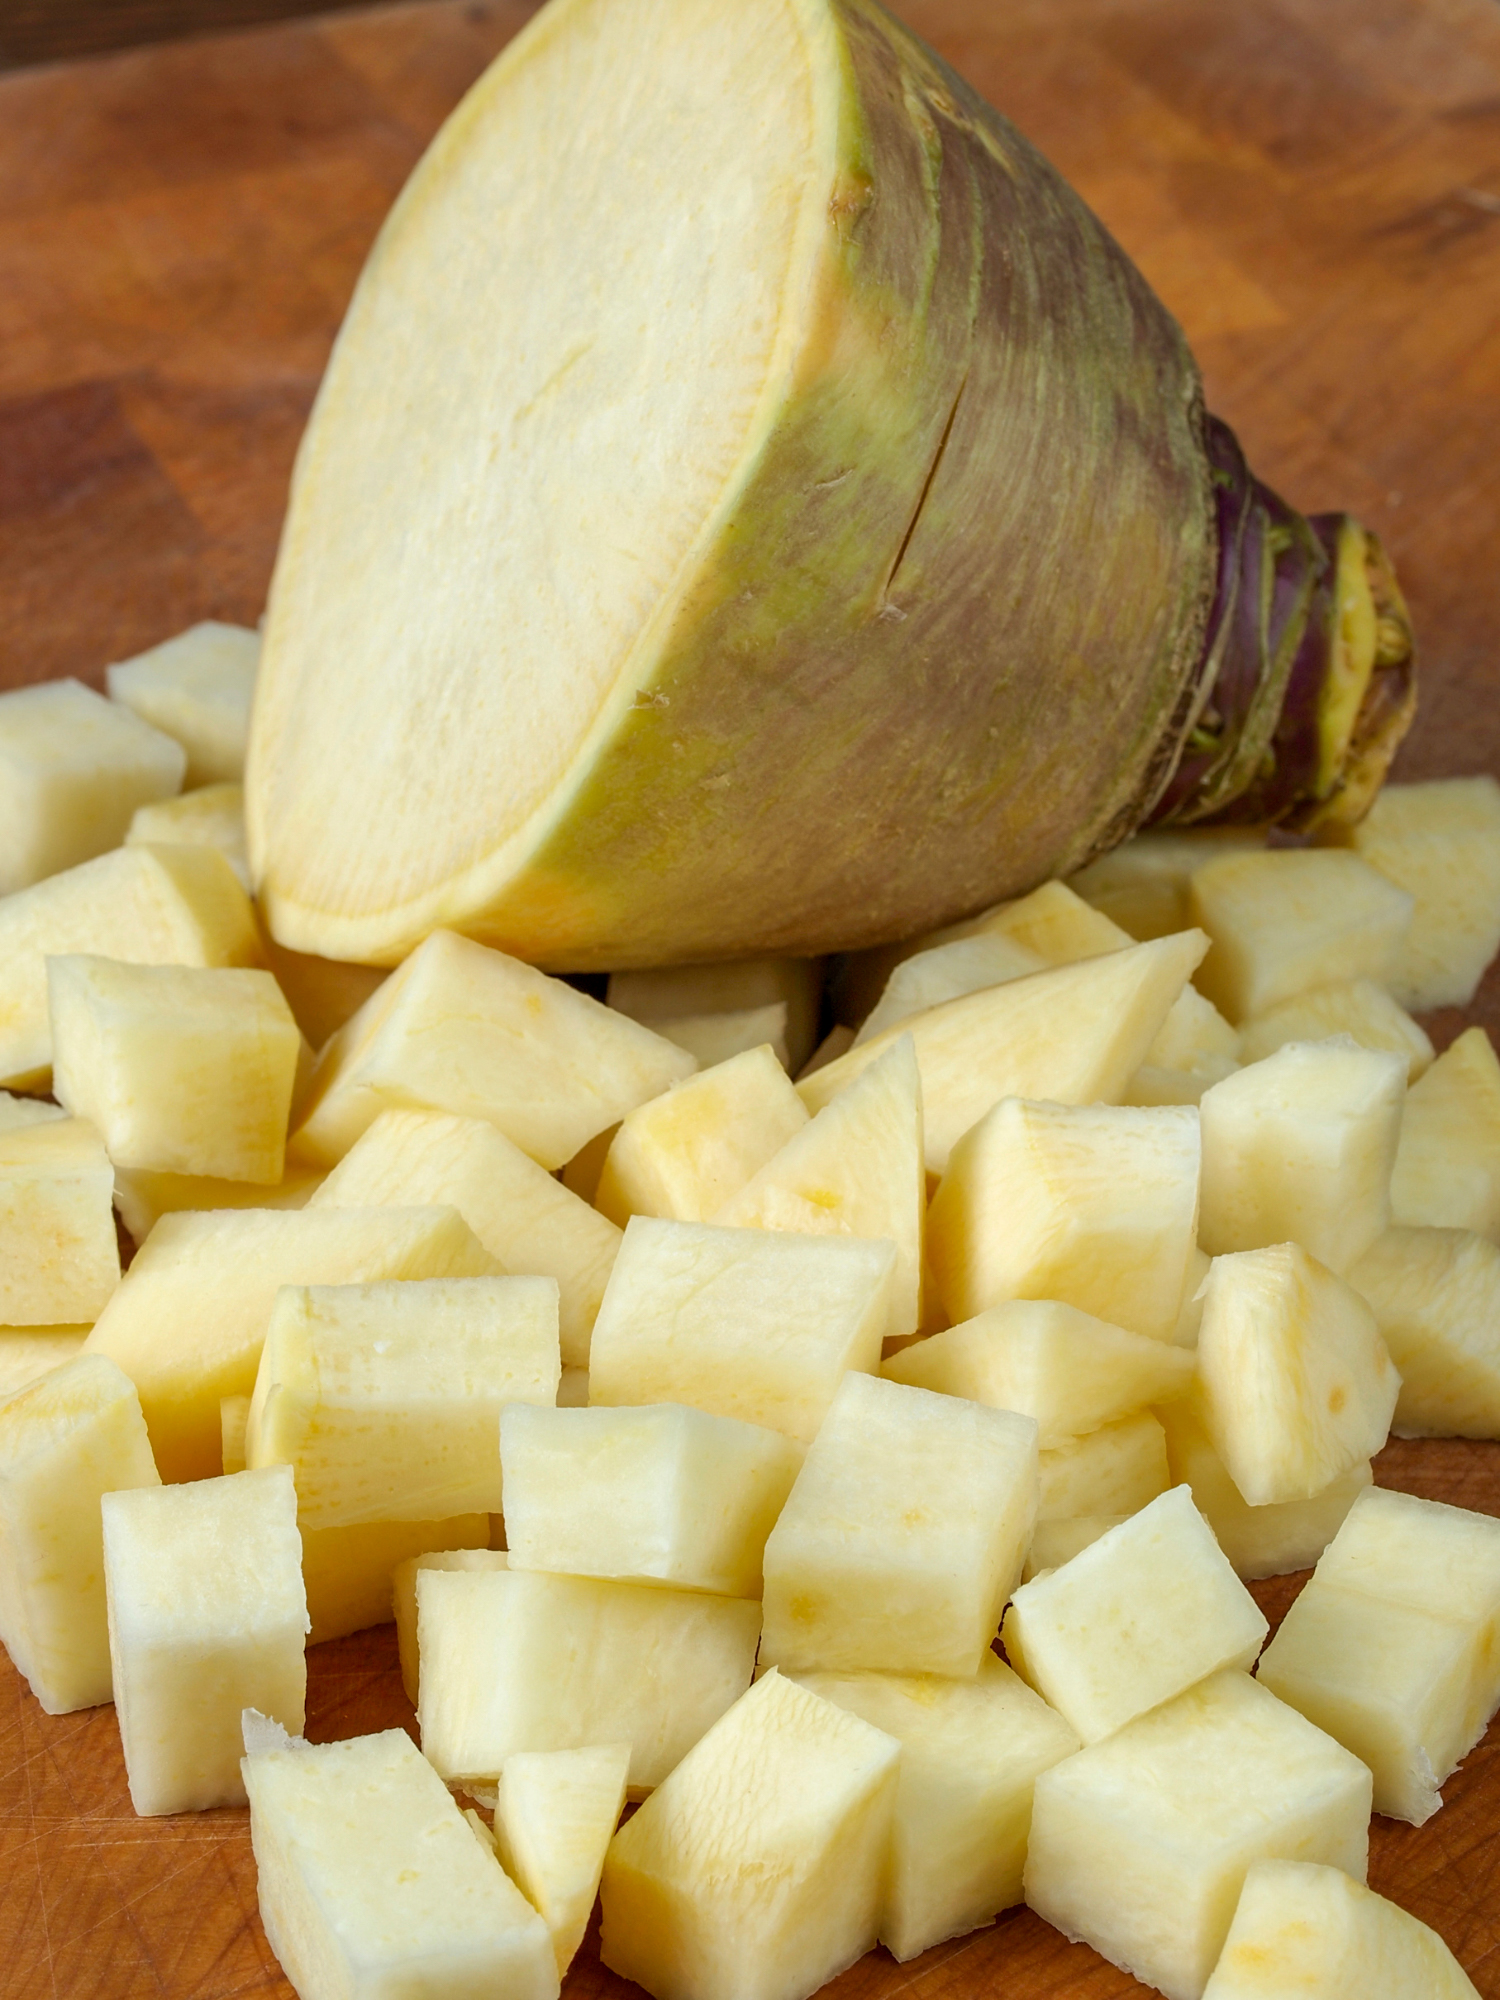 a rutabaga that is partially diced on a cutting board